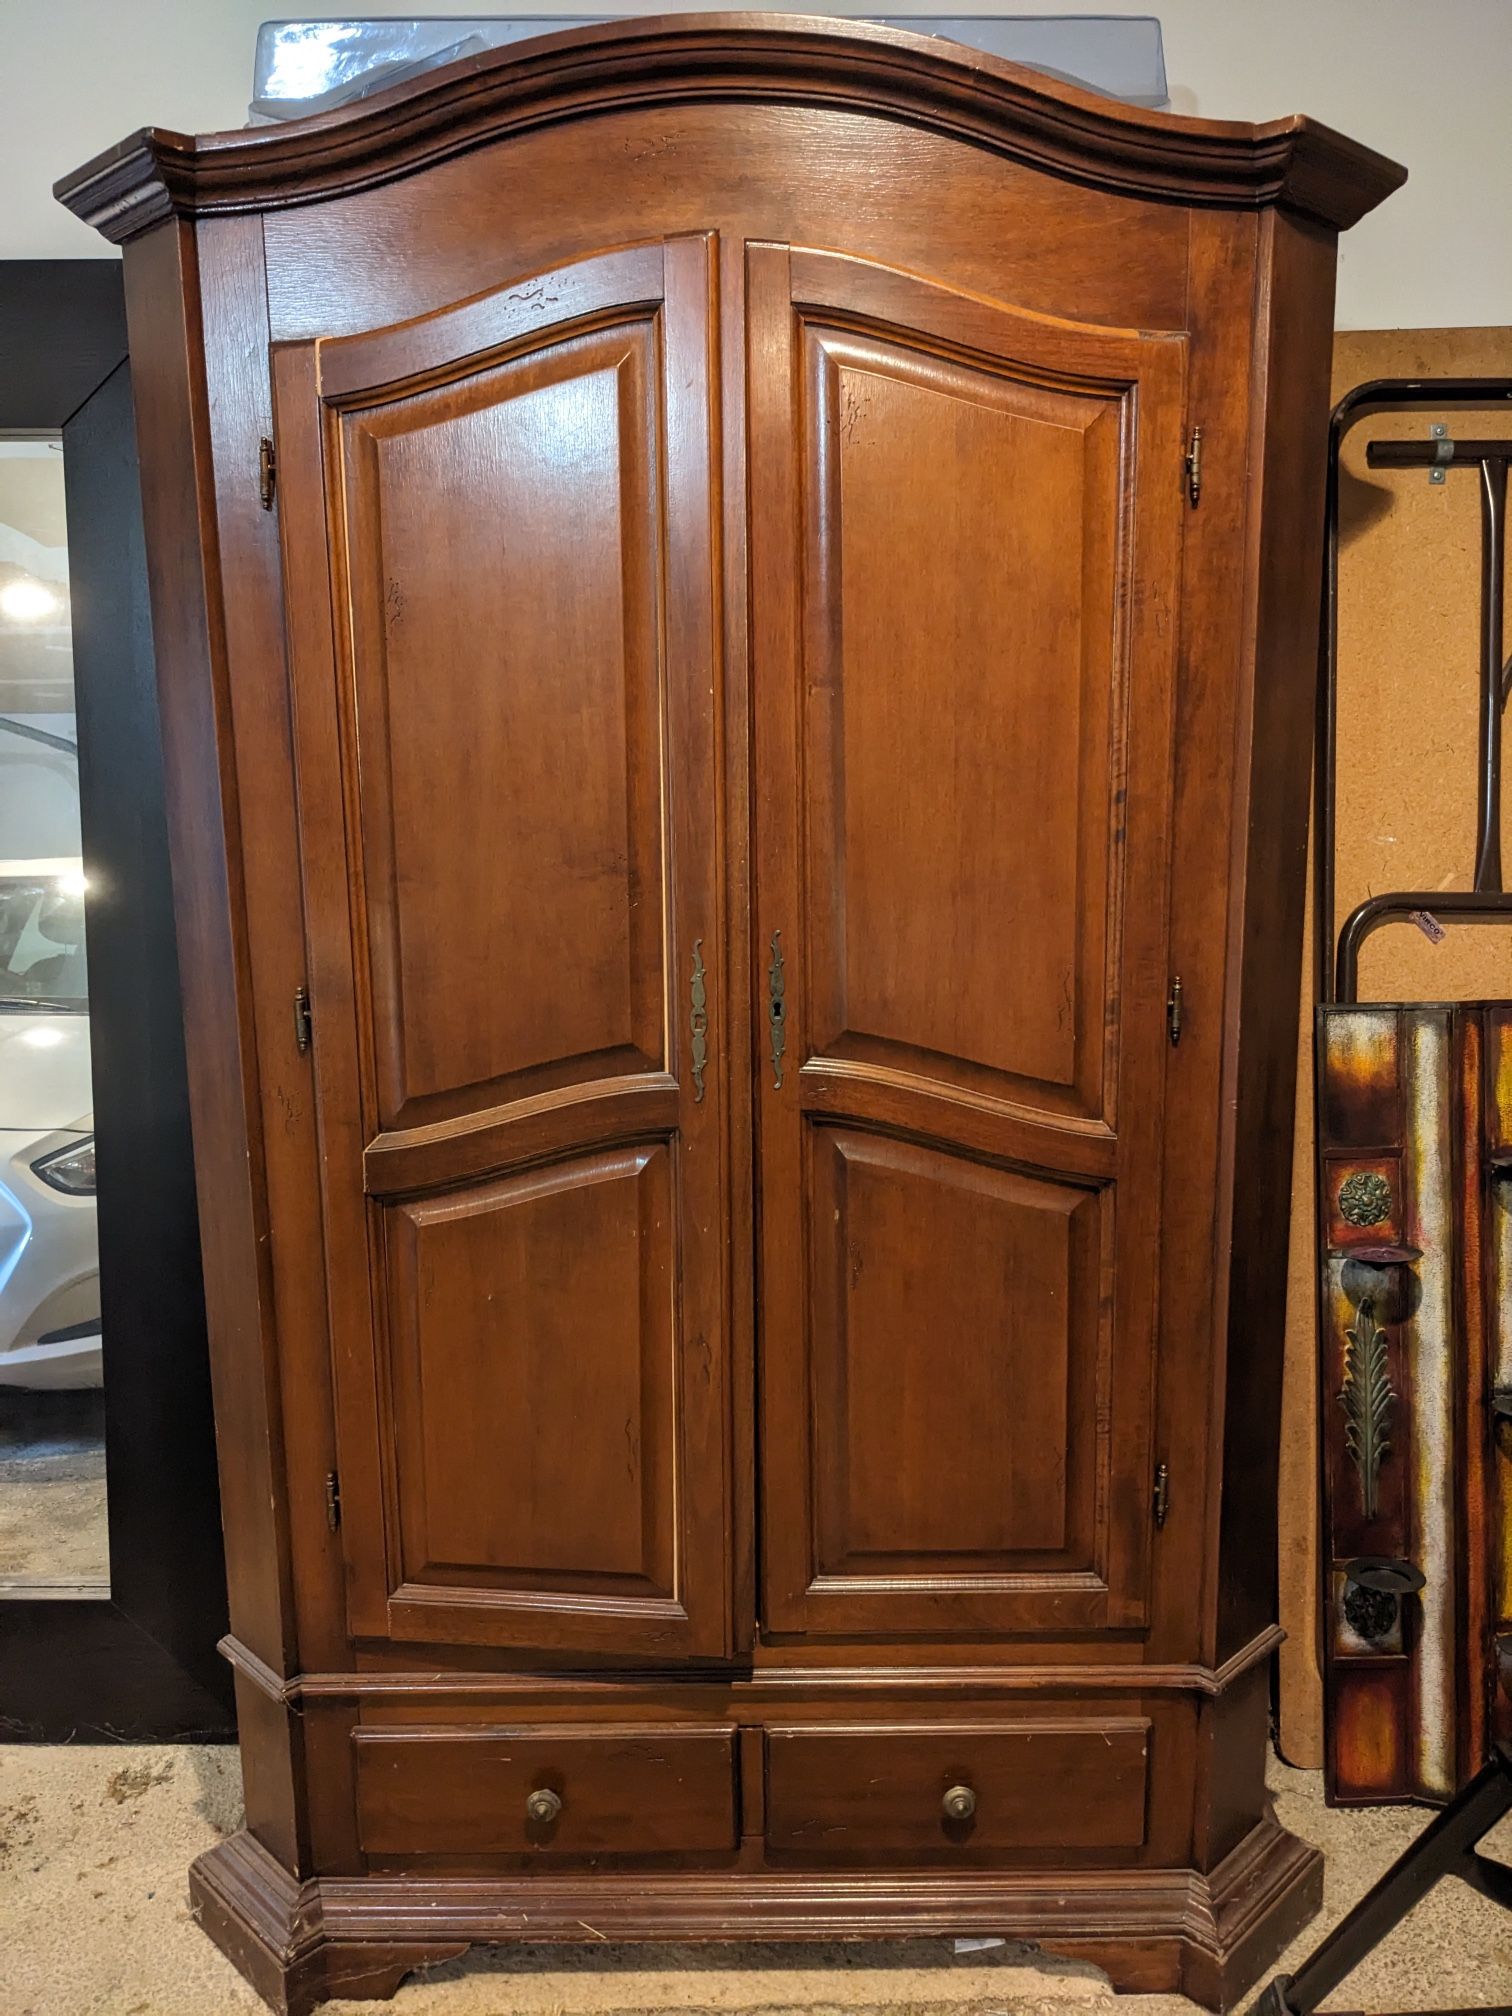 LARGE Antique Solid Wood Wardrobe Closet, Armoire